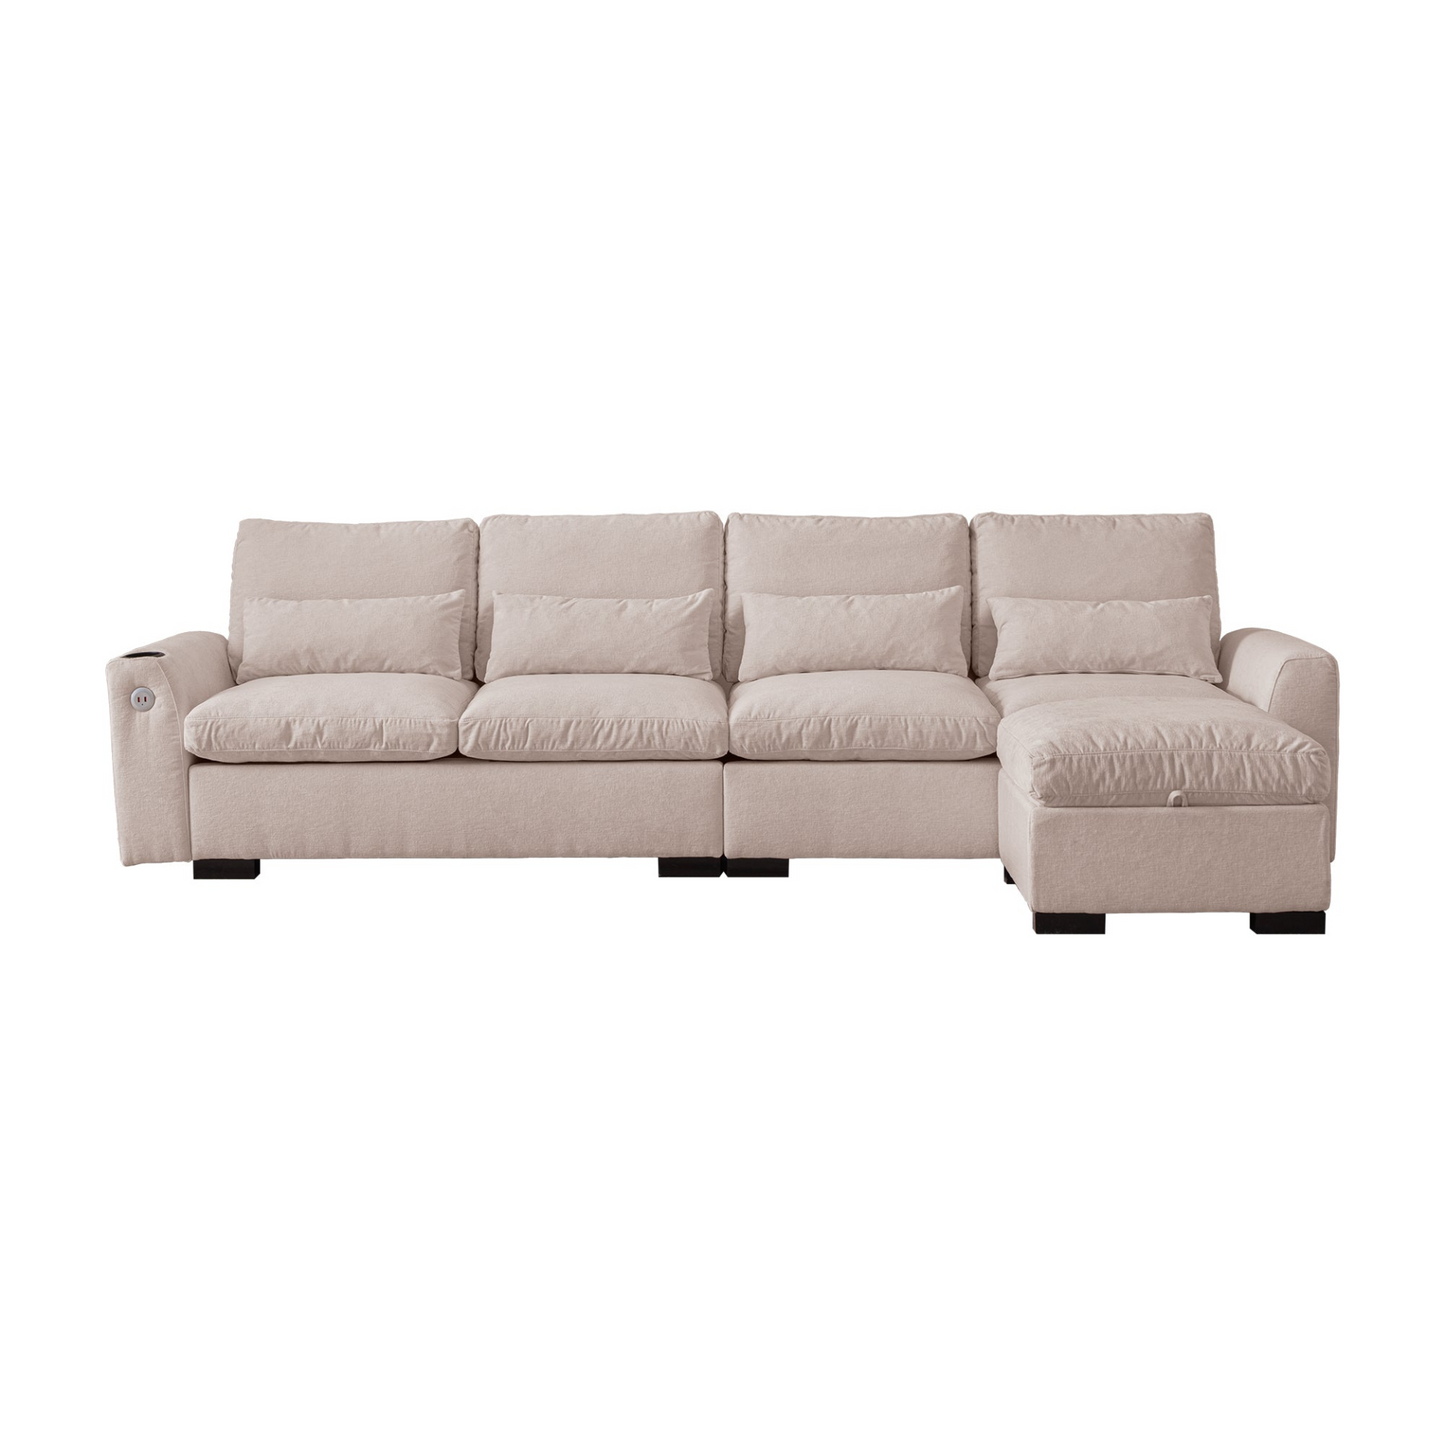 114.5"Modern Modular L Shaped Chenille Sofa Couch Reversible Ottoman With Storage Removable and Washable Cushions Sofa With USB Ports & Cup Holder For Living Room